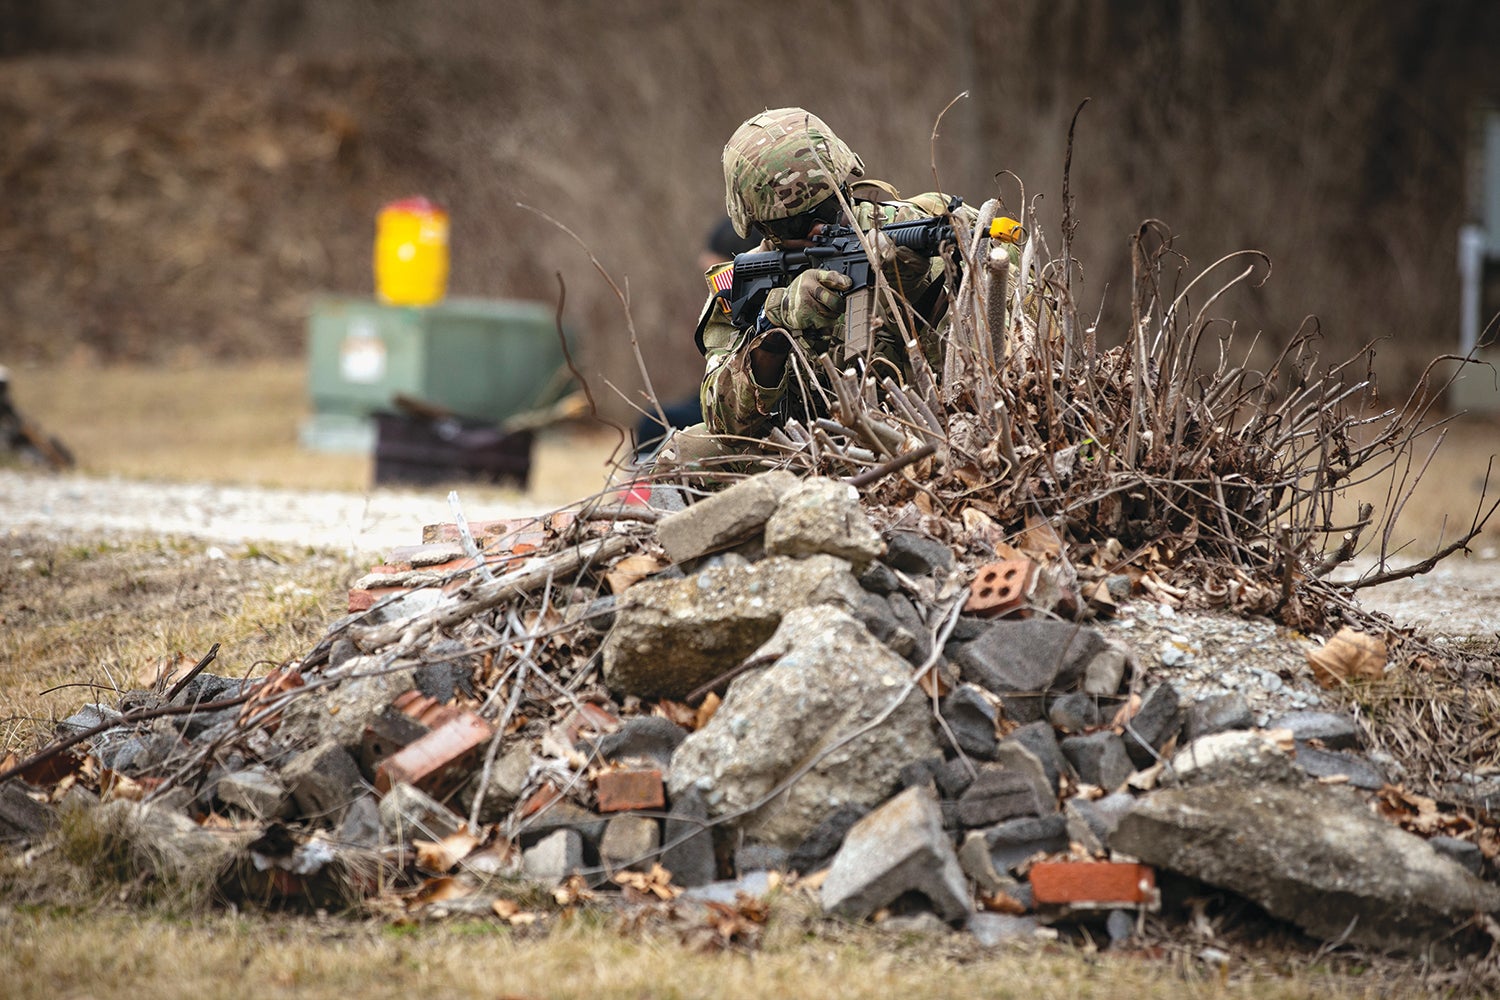 Sgt. Theron Bullcock provides security during a competition hosted by the U.S. Army Reserve’s 310th Expeditionary Sustainment Command at Camp Atterbury, Indiana. (Credit: U.S. Army Reserve/Capt. Caitlin Sweet)